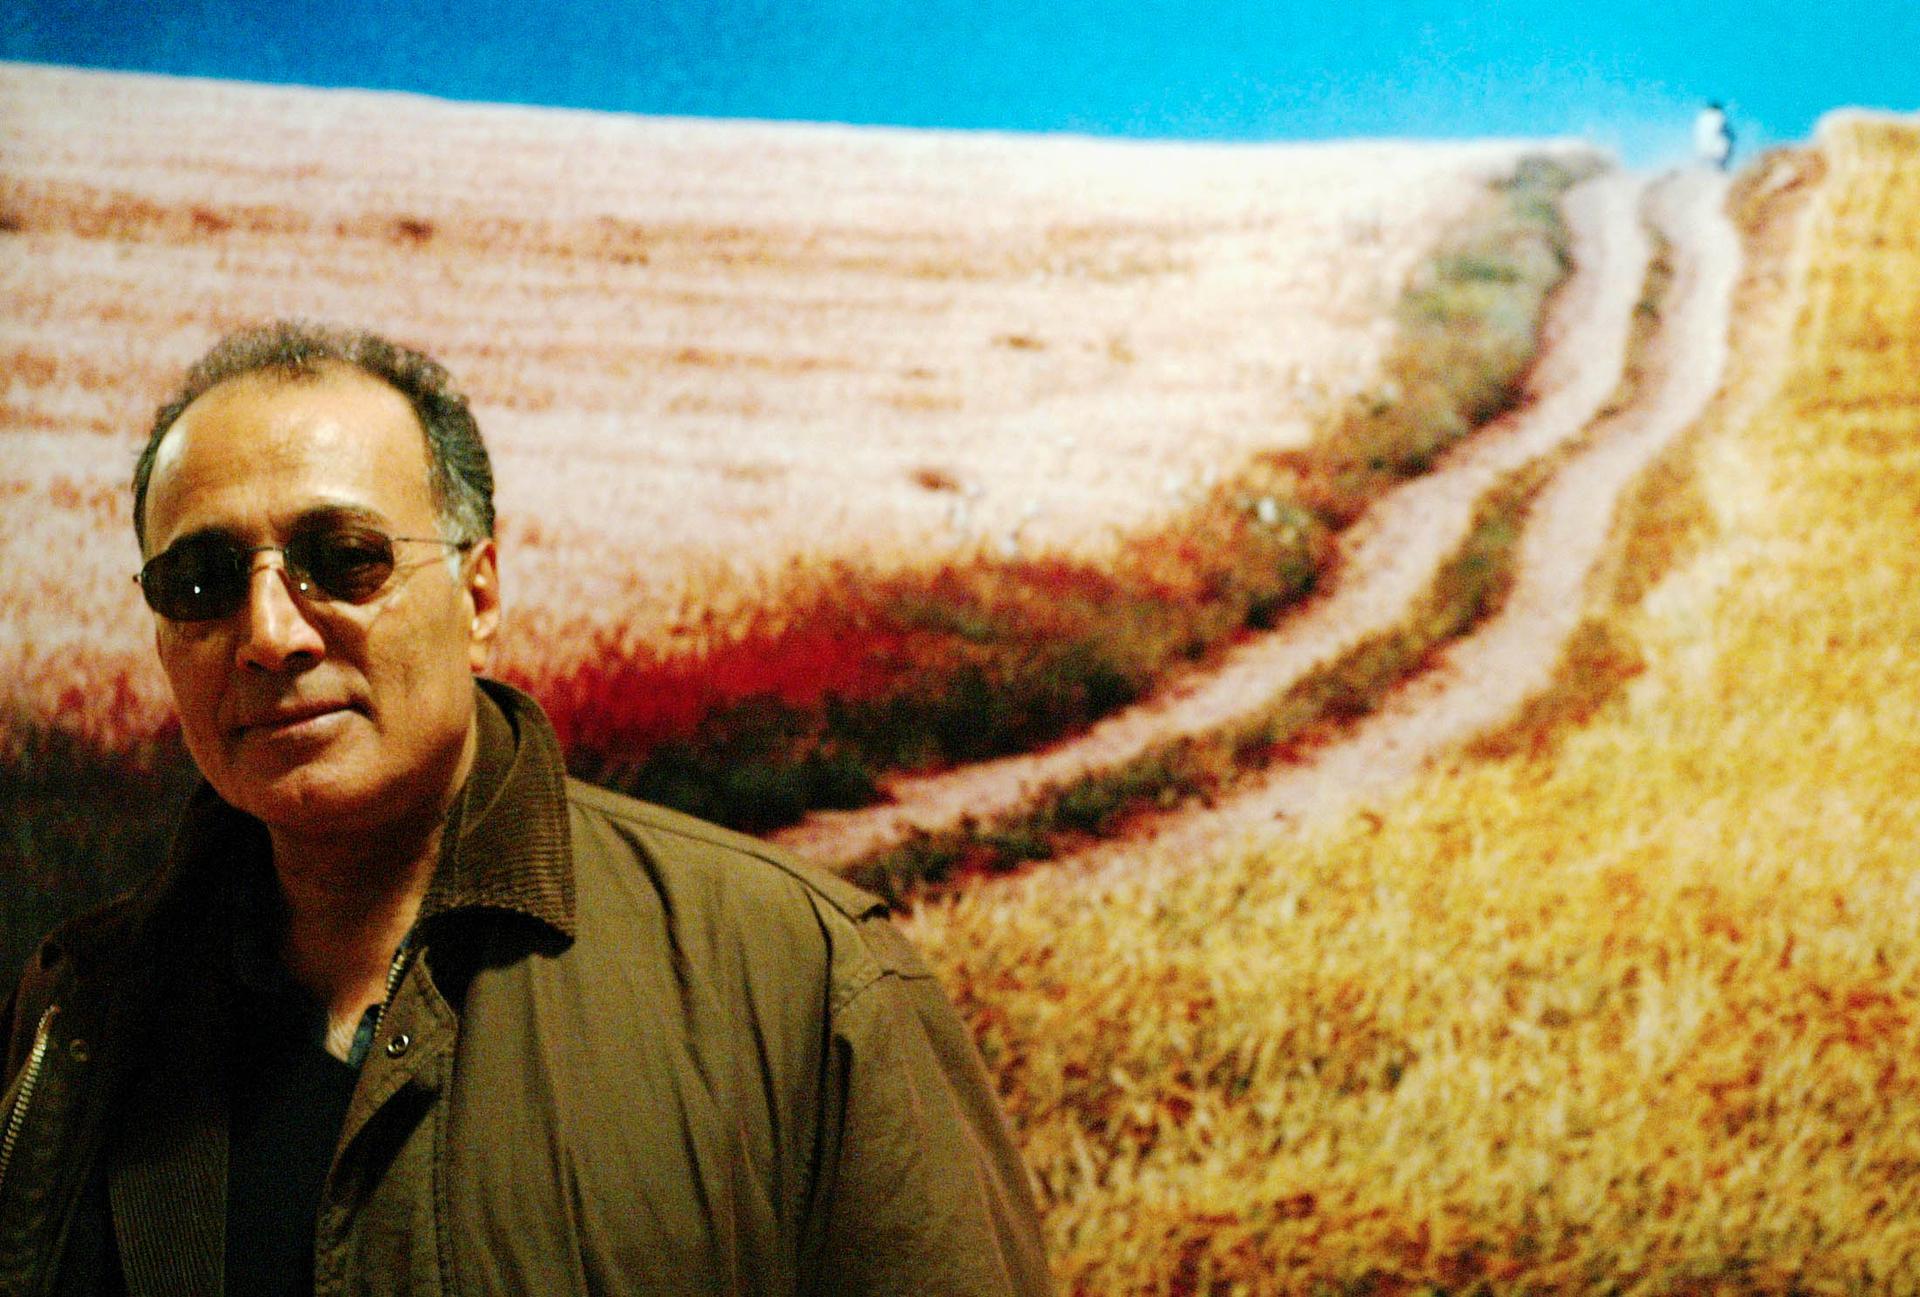 Iranian film director Abbas Kiarostami poses in front of a poster for his film "The Wind Will Carry Us" at the Portuguese film museum in Lisbon February 27, 2004.